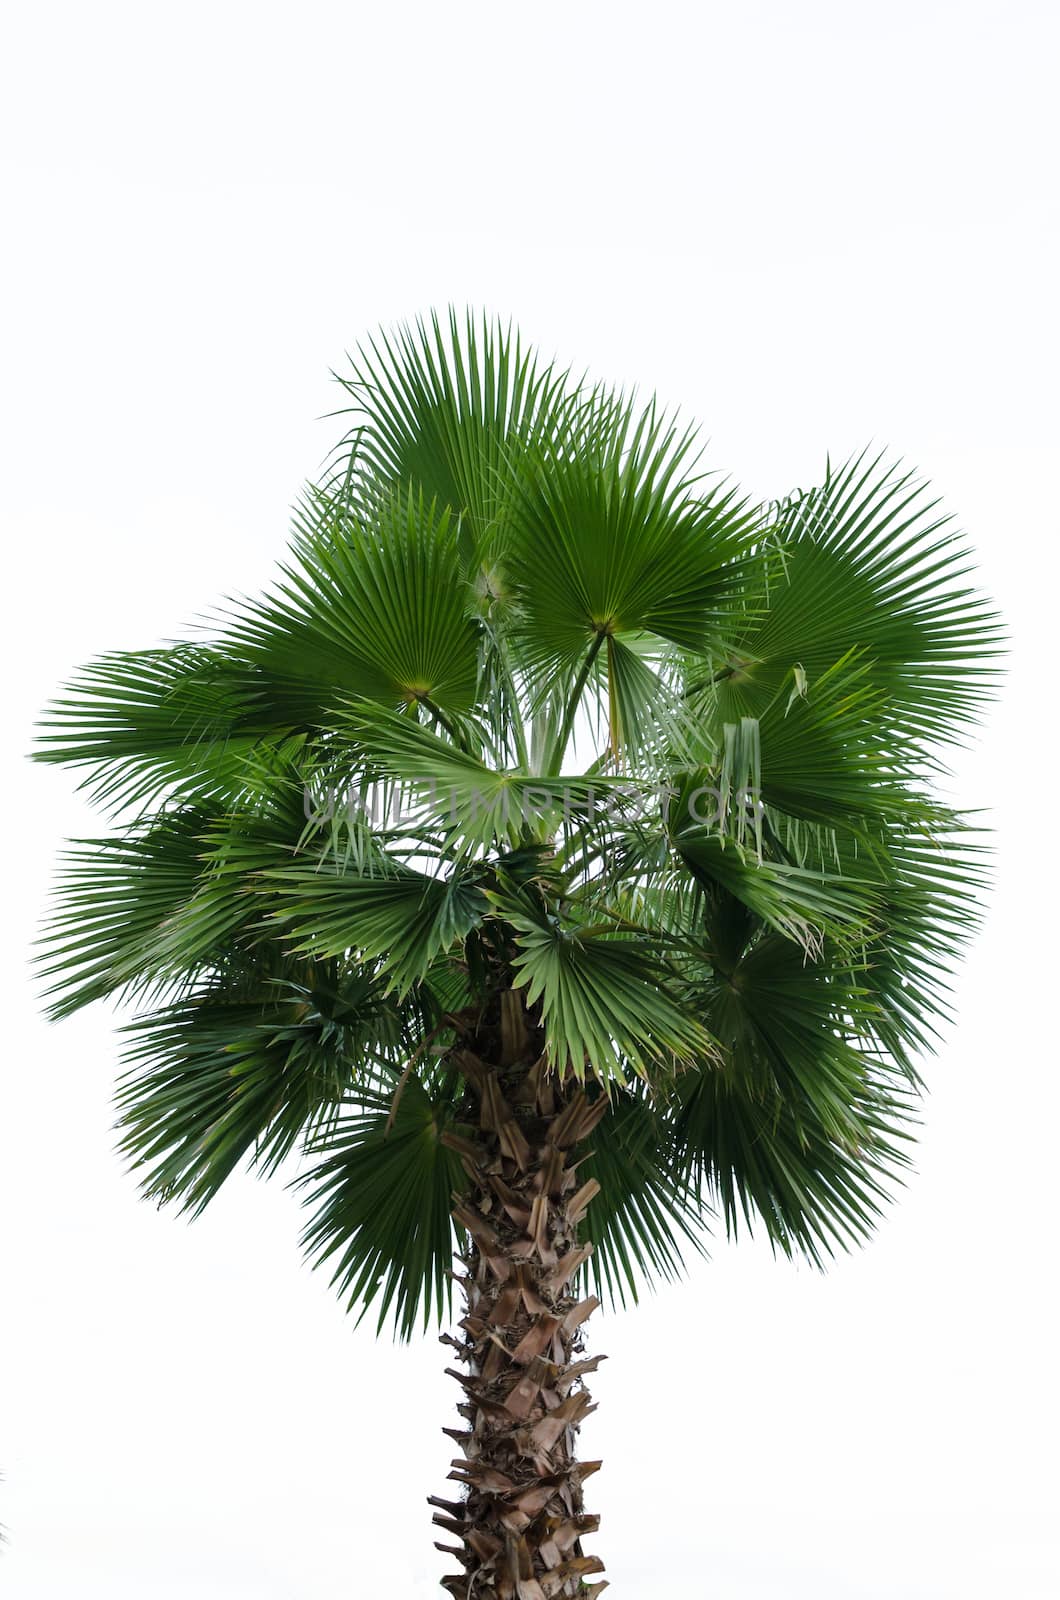 Borassus flabellifer, known by several common names, including Asian Palmyra palm, Toddy palm, Sugar palm, or Cambodian palm, tropical tree in the northeast of Thailand isolated on white background.